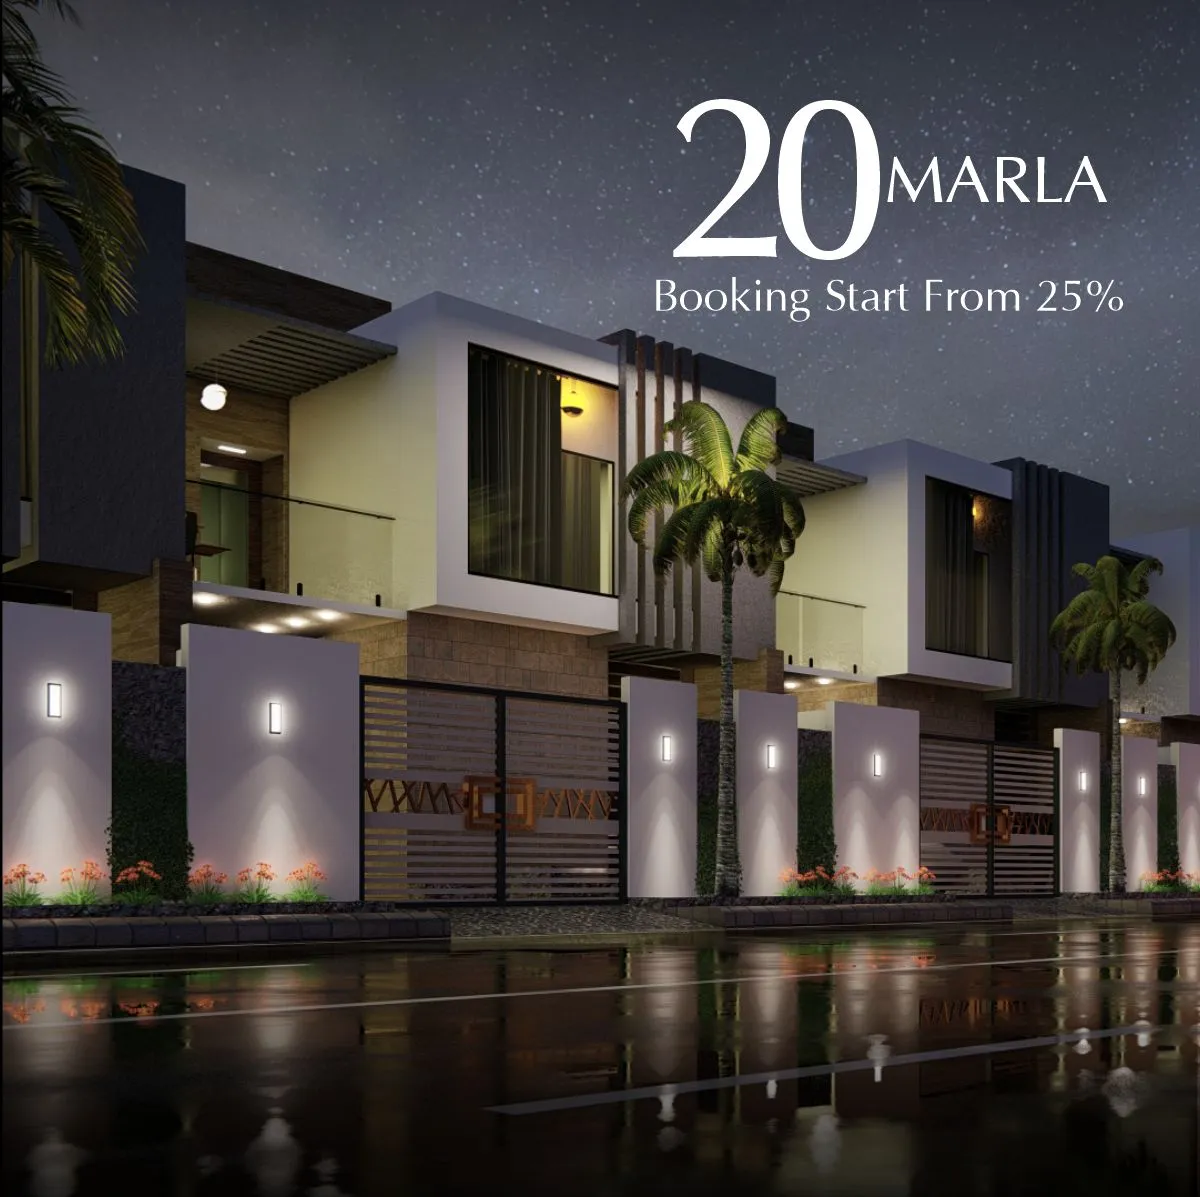 Experience dream living at affordable prices by buying fully furnished chalet villas of 5 Marla, 10 Marla, and 1 Kanal in full payment or installments.